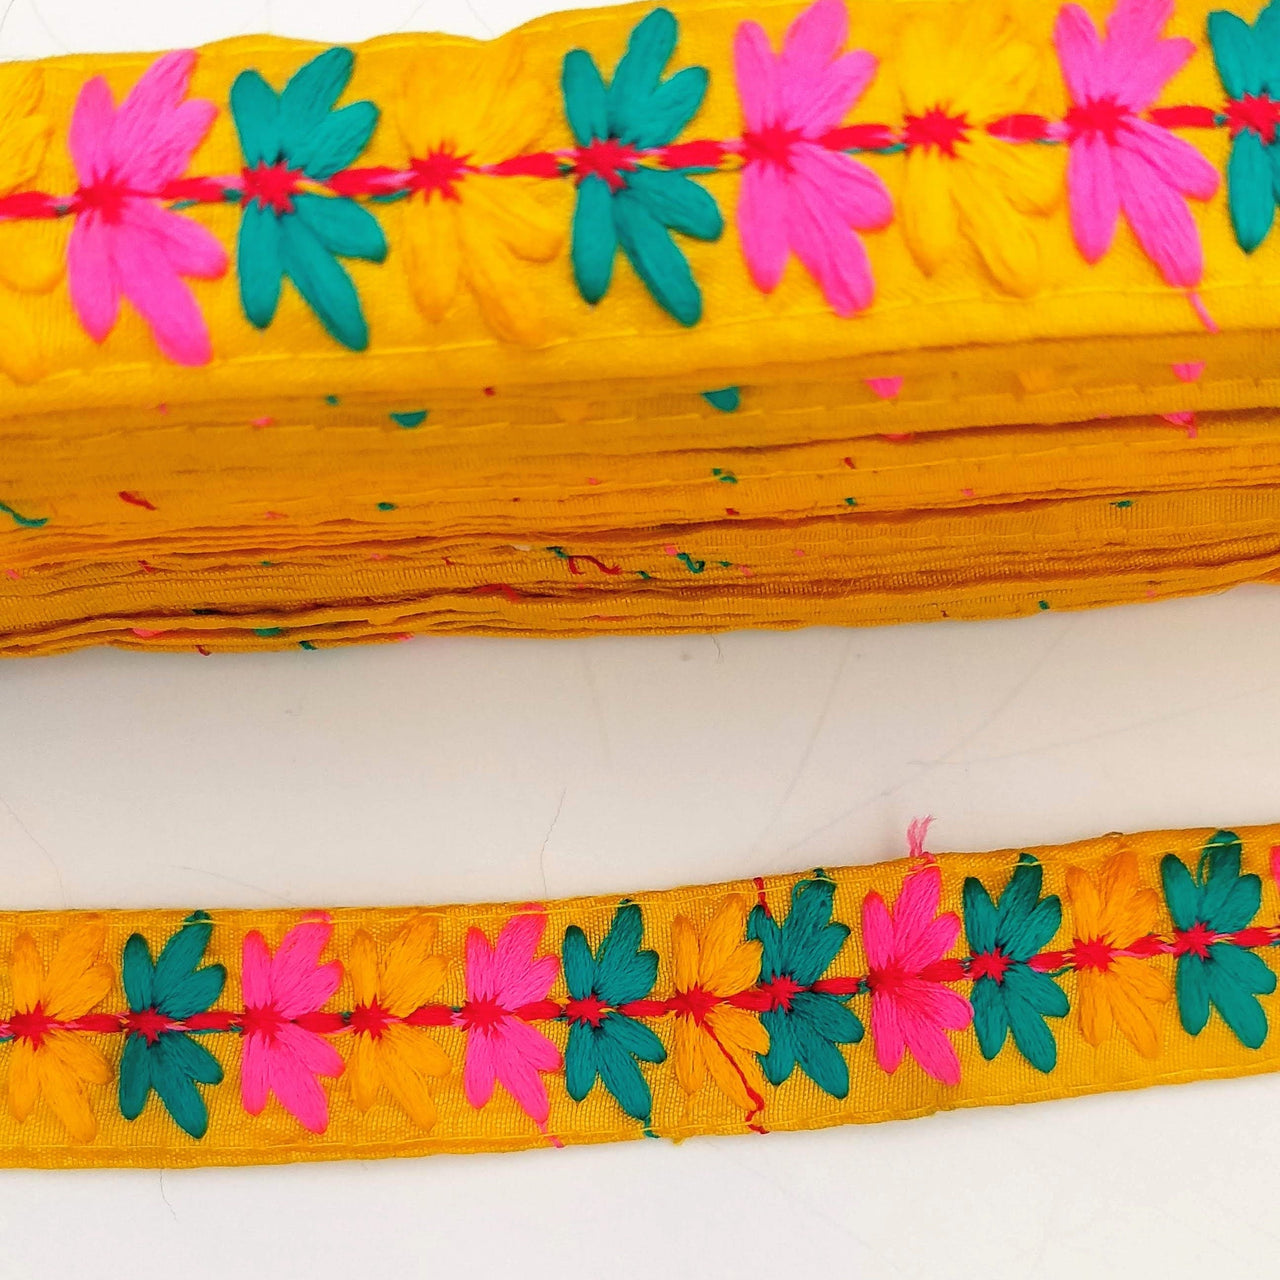 Yellow Cotton Fabric Trim with Floral Embroidery in Blue, Pink, Yellow and Red